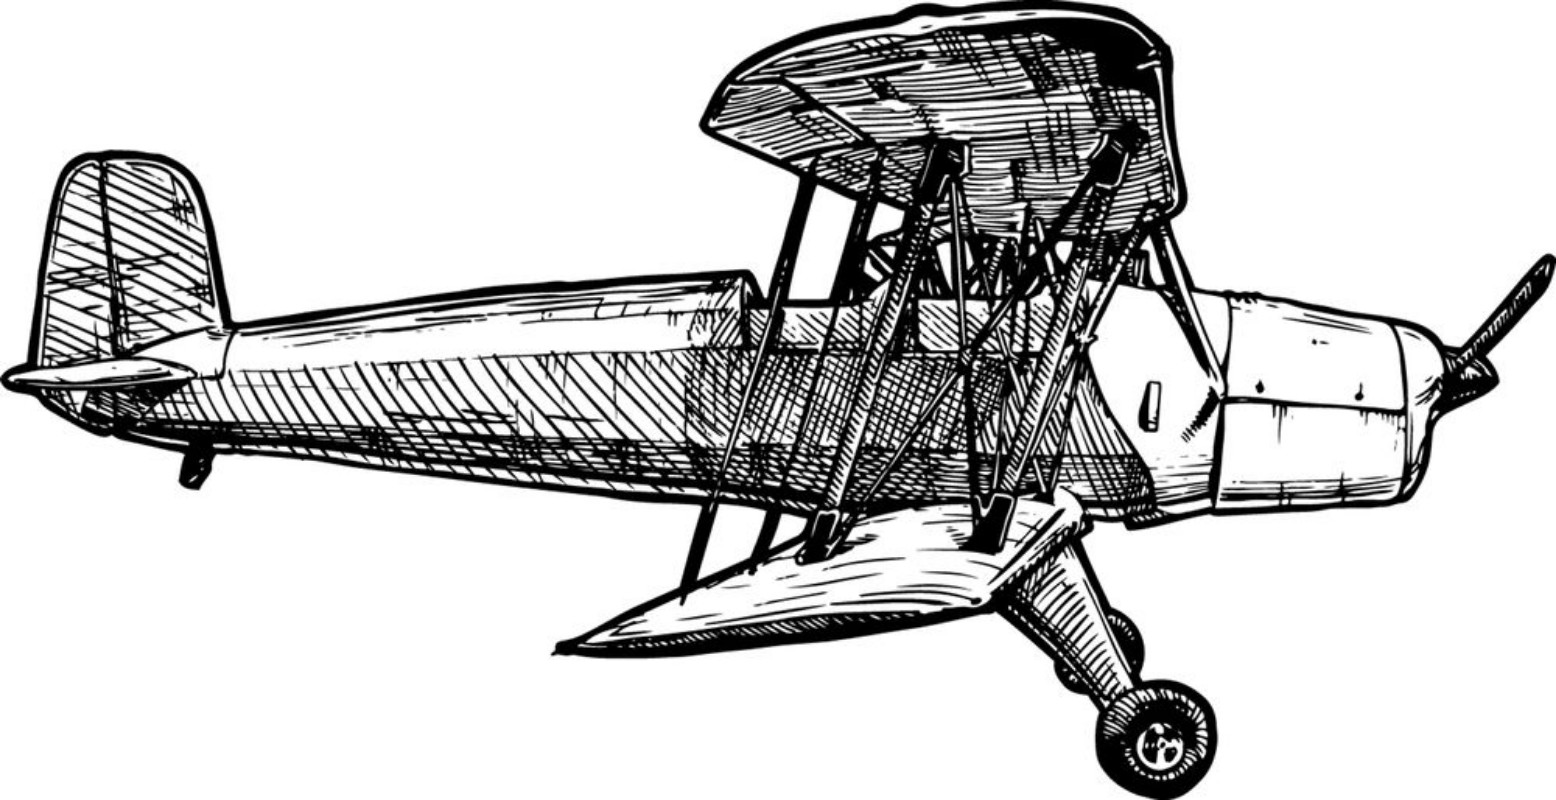 Image de Vector drawing of airplane stylized as engraving